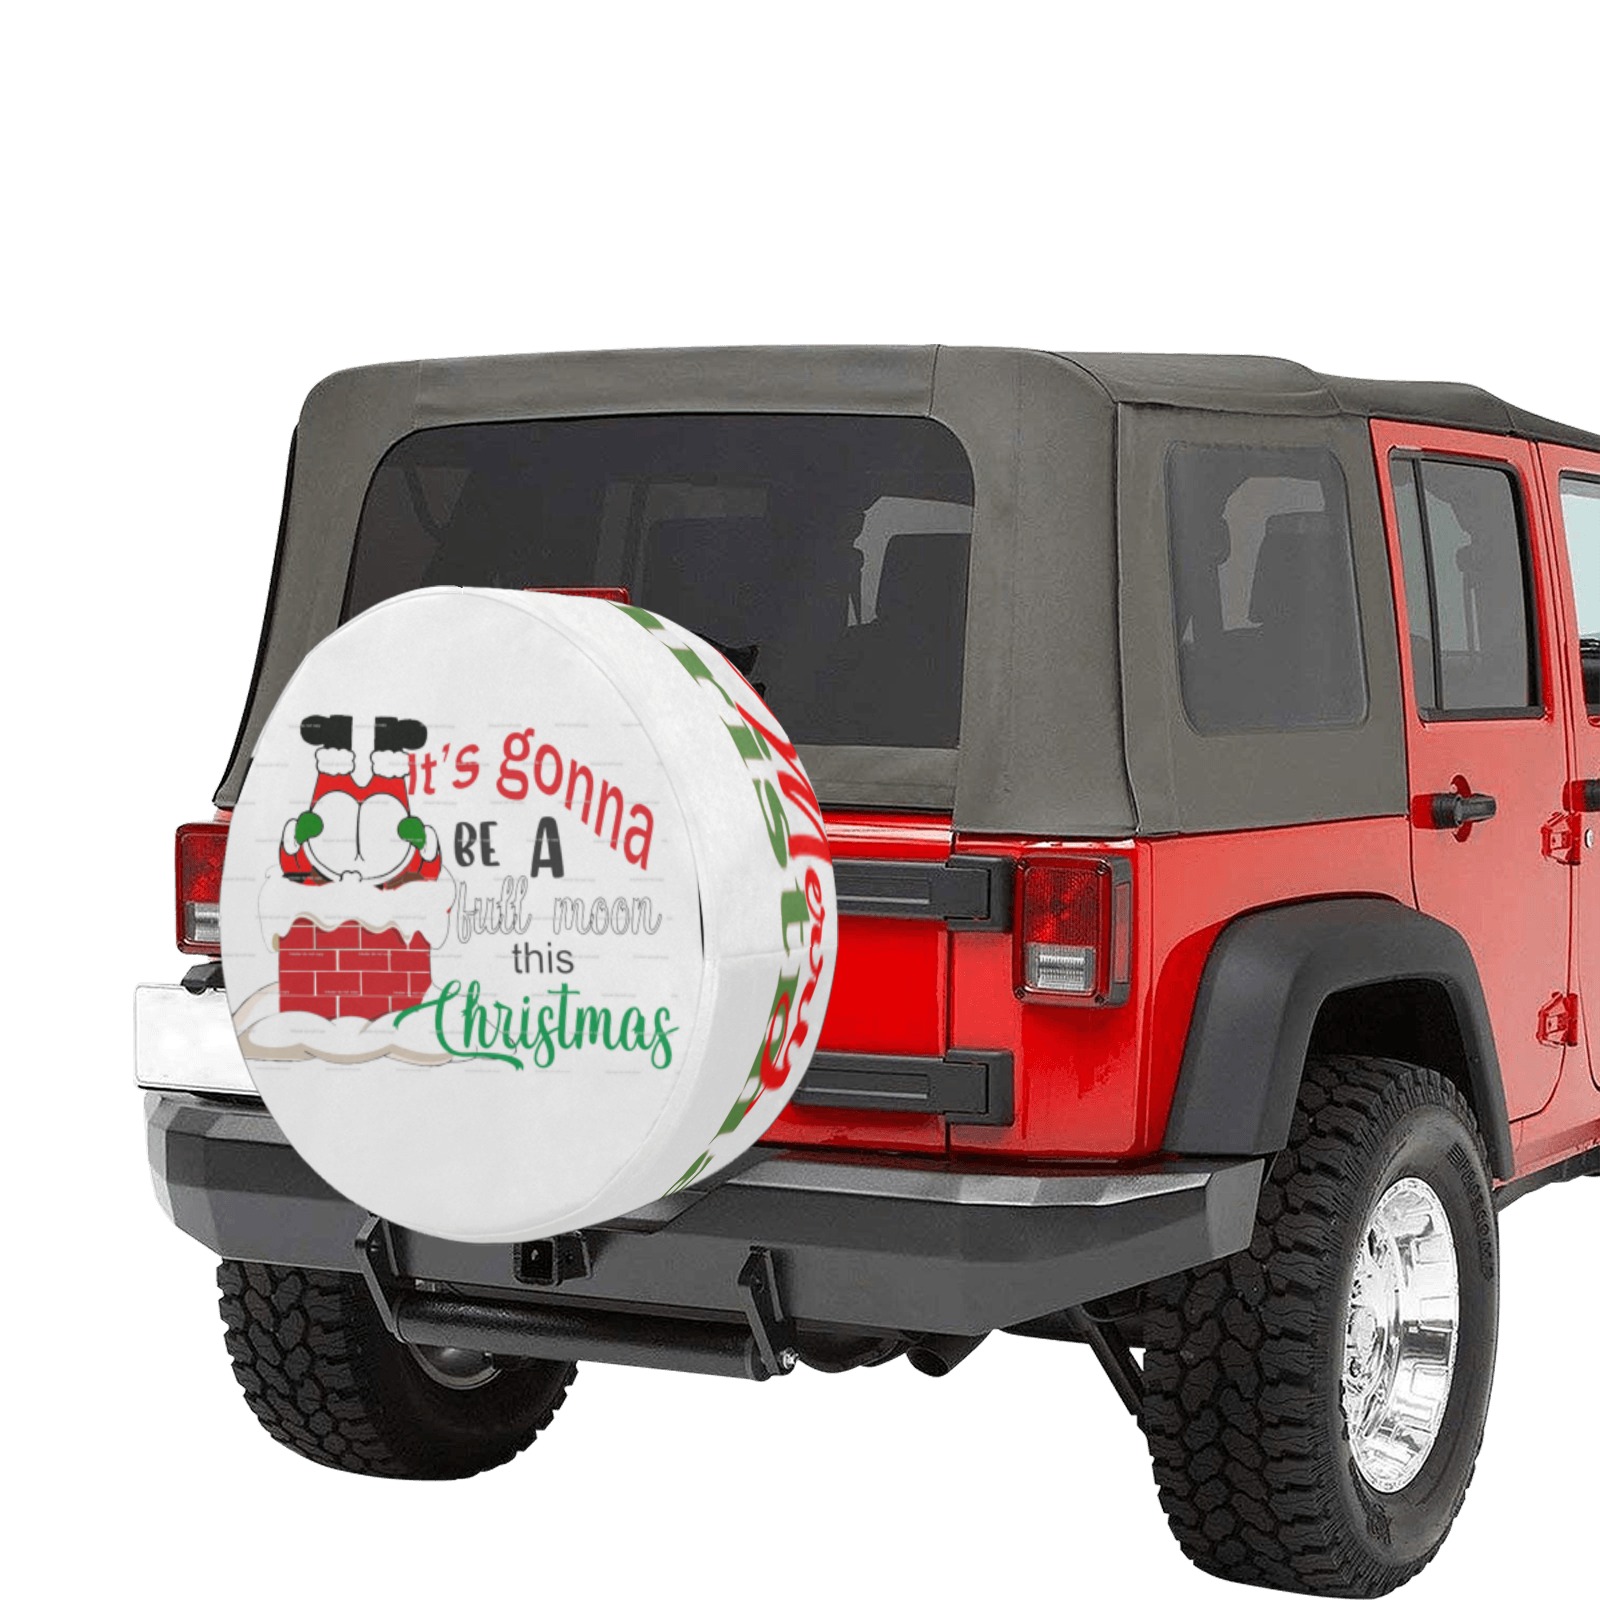 full moon christmas34 34 Inch Spare Tire Cover